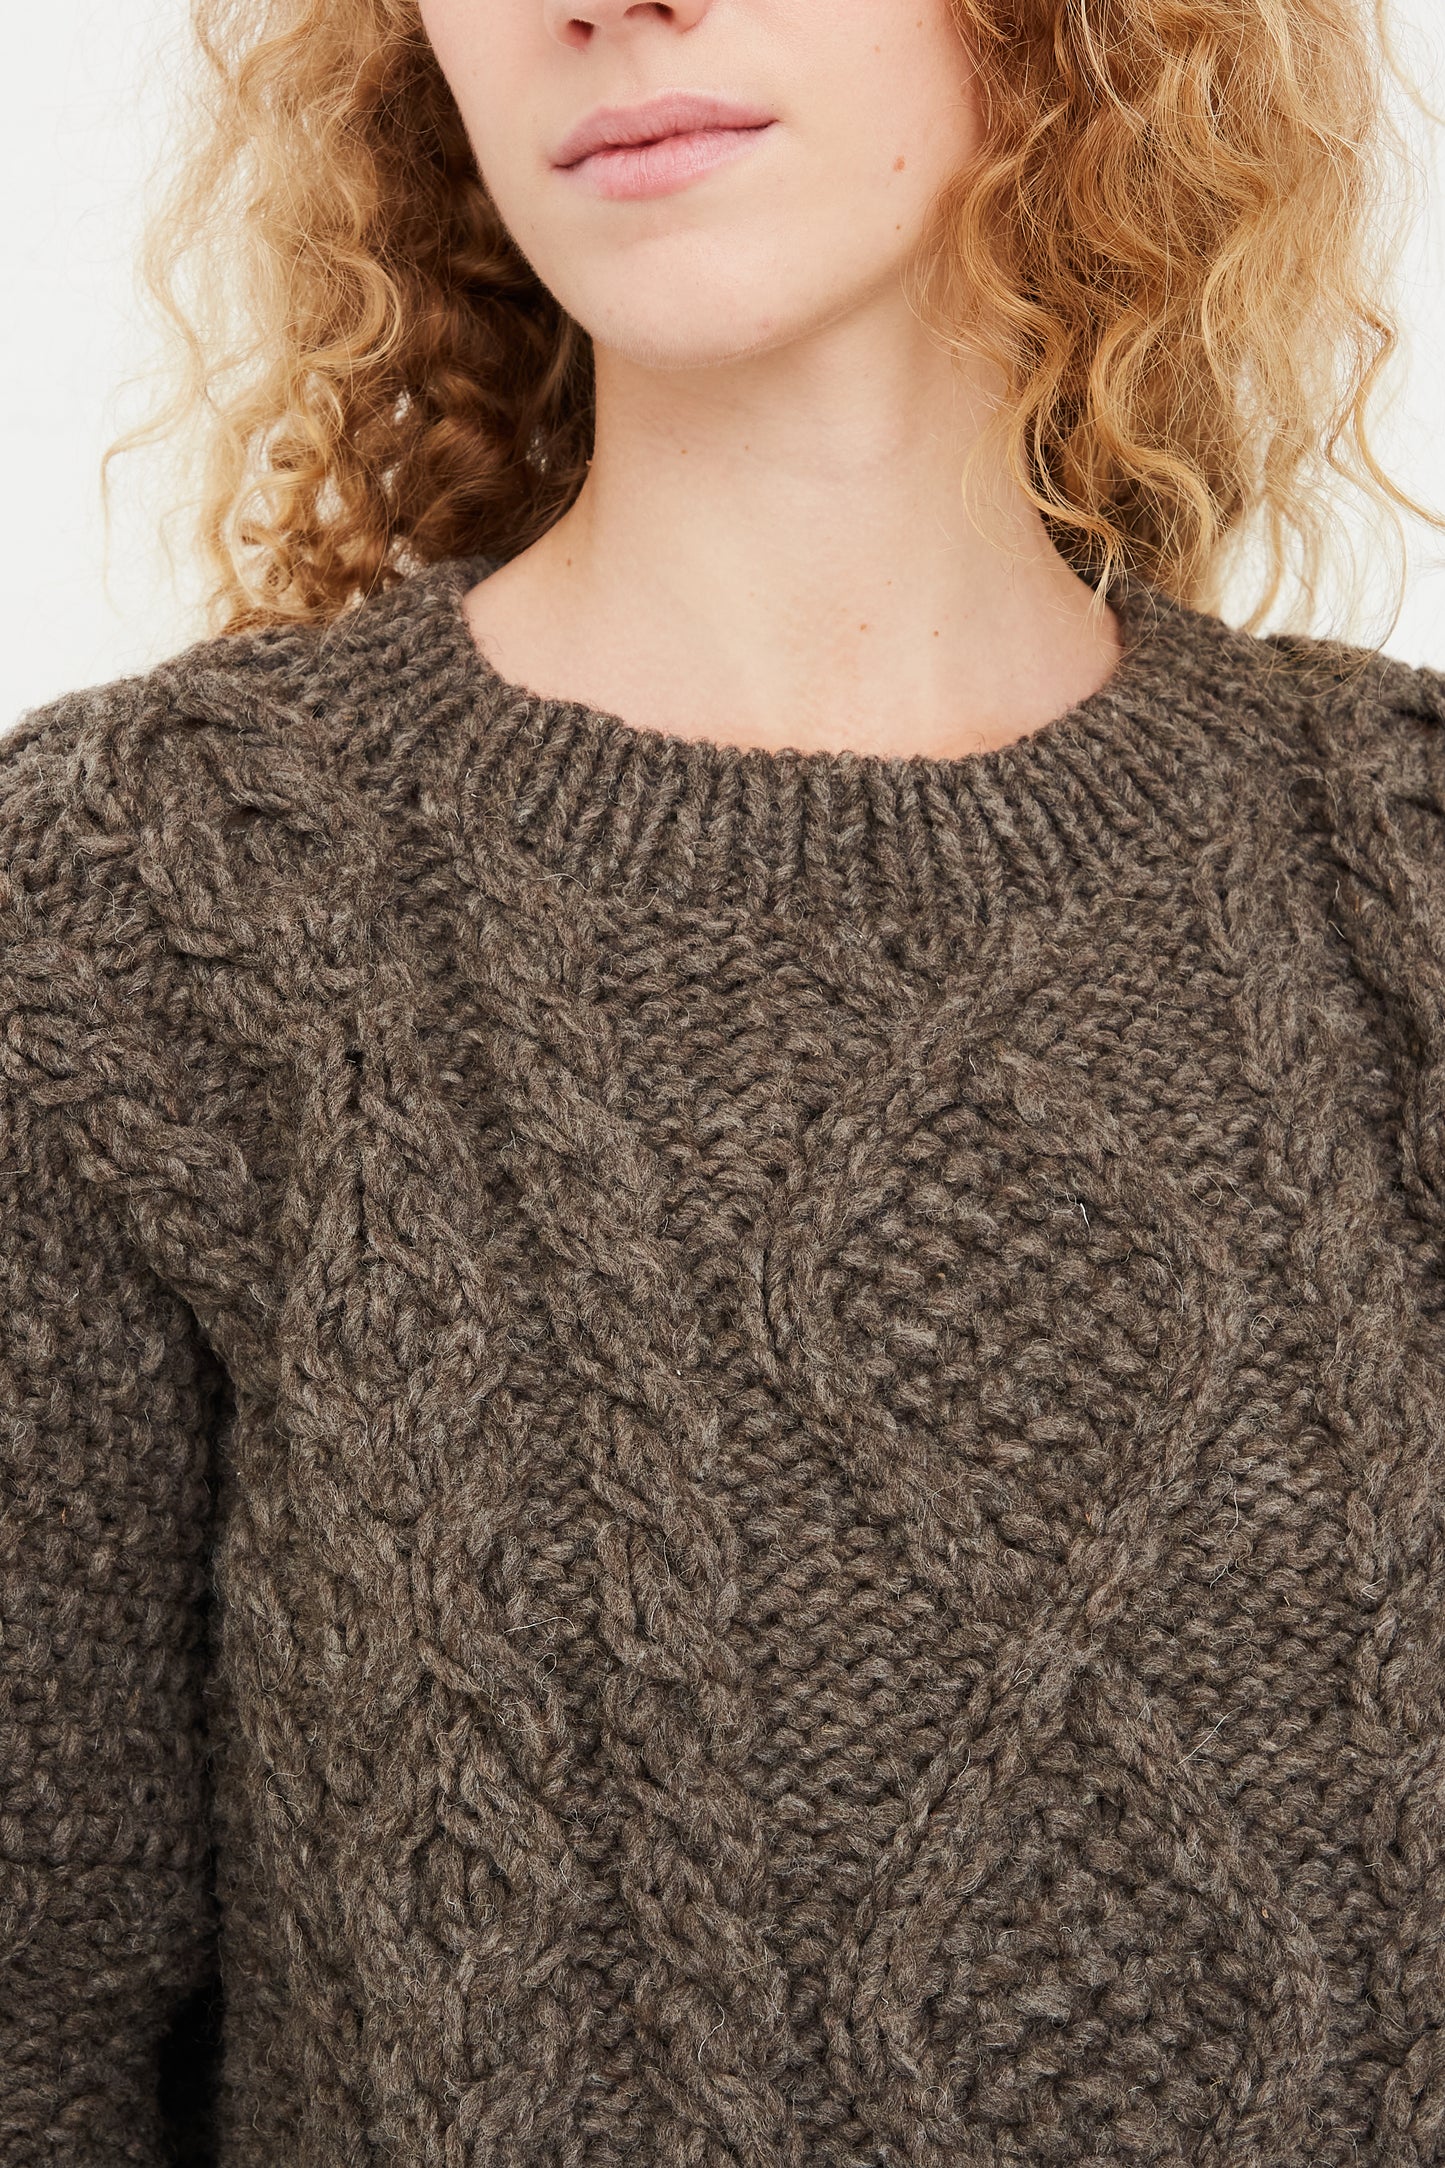 A woman wearing a Wool Hand-Knit Pullover in Mocha by Ichi Antiquités.